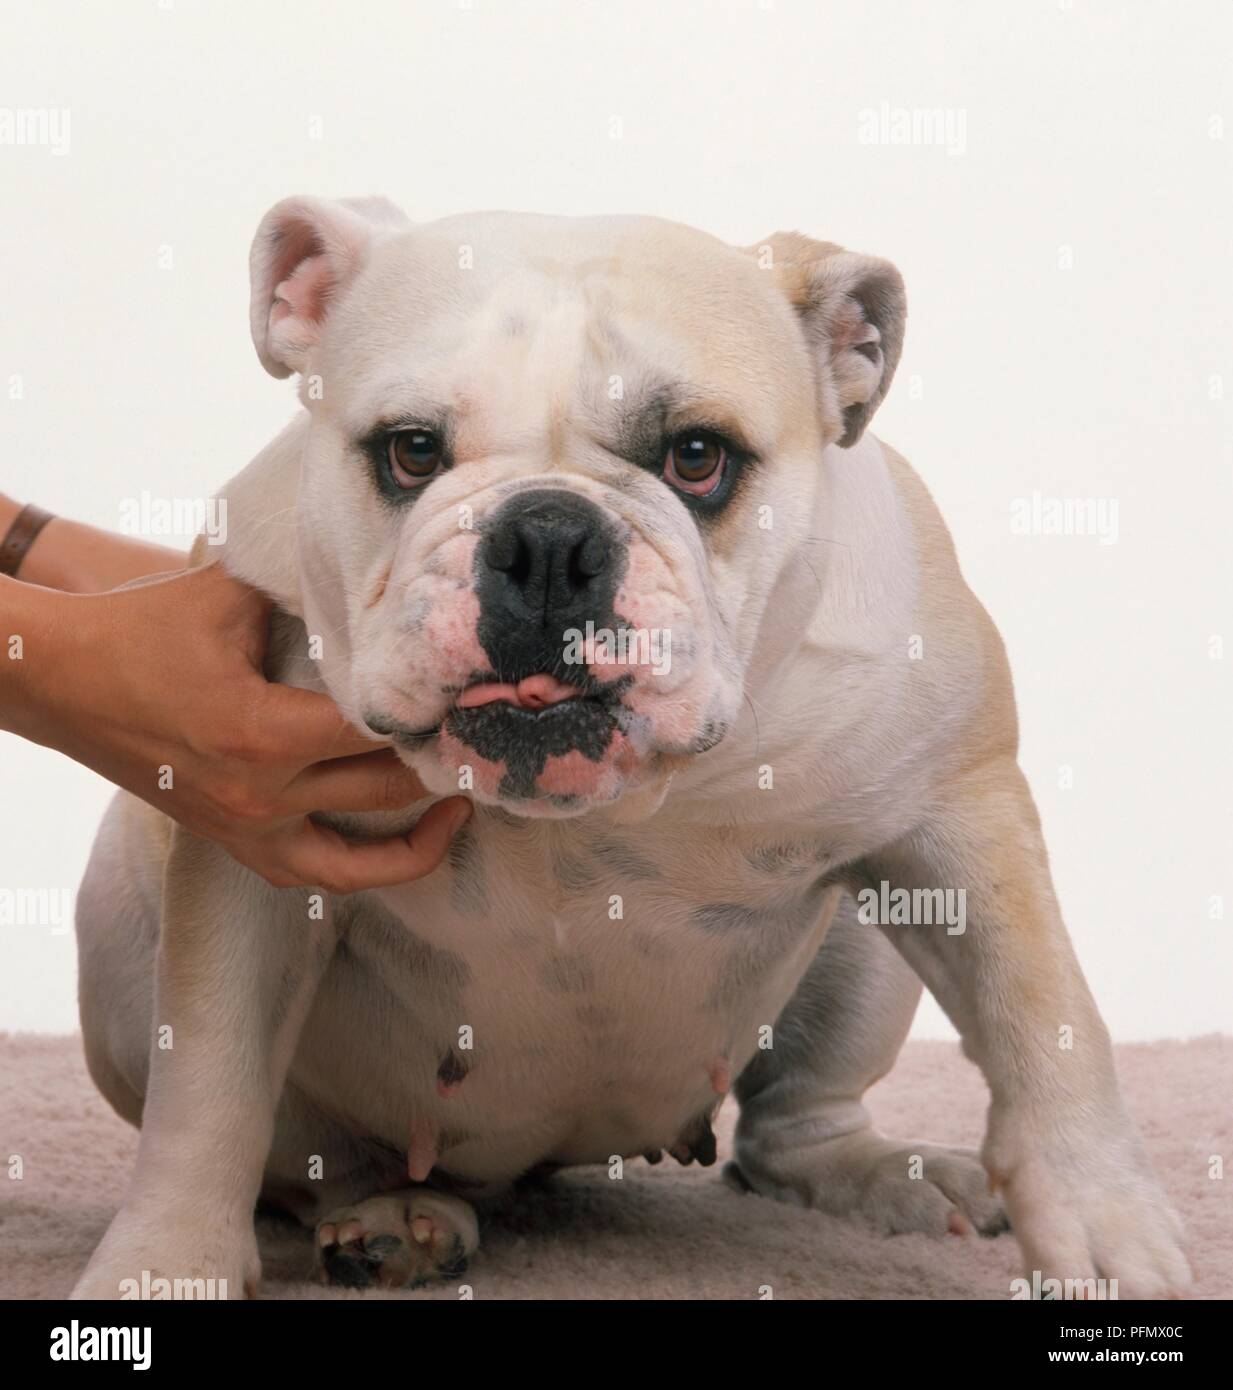 Bulldog being held back by a woman's hands, front view Stock Photo